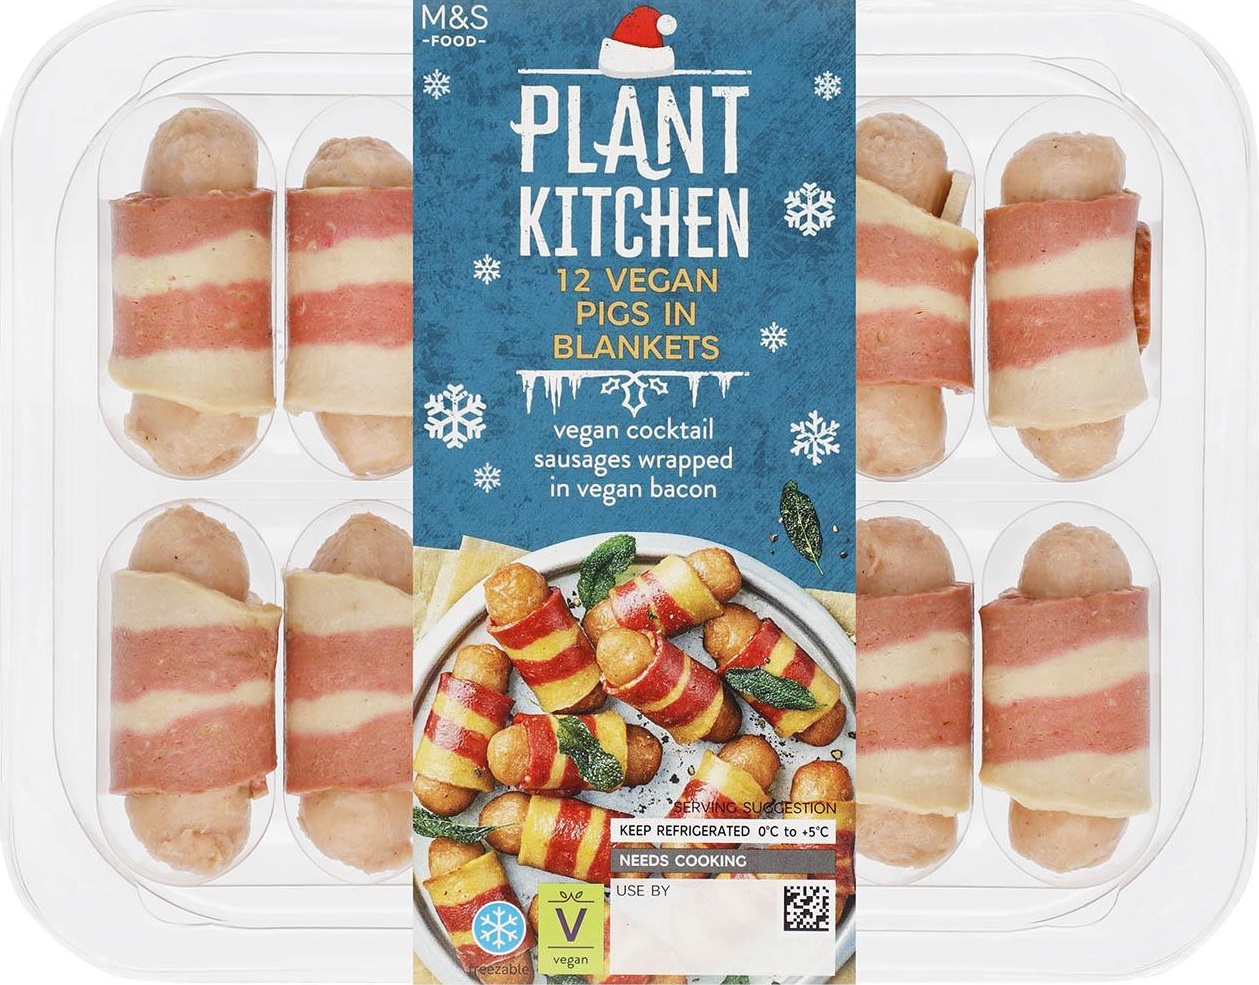 M&S Plant Kitchen Pigs in Blankets